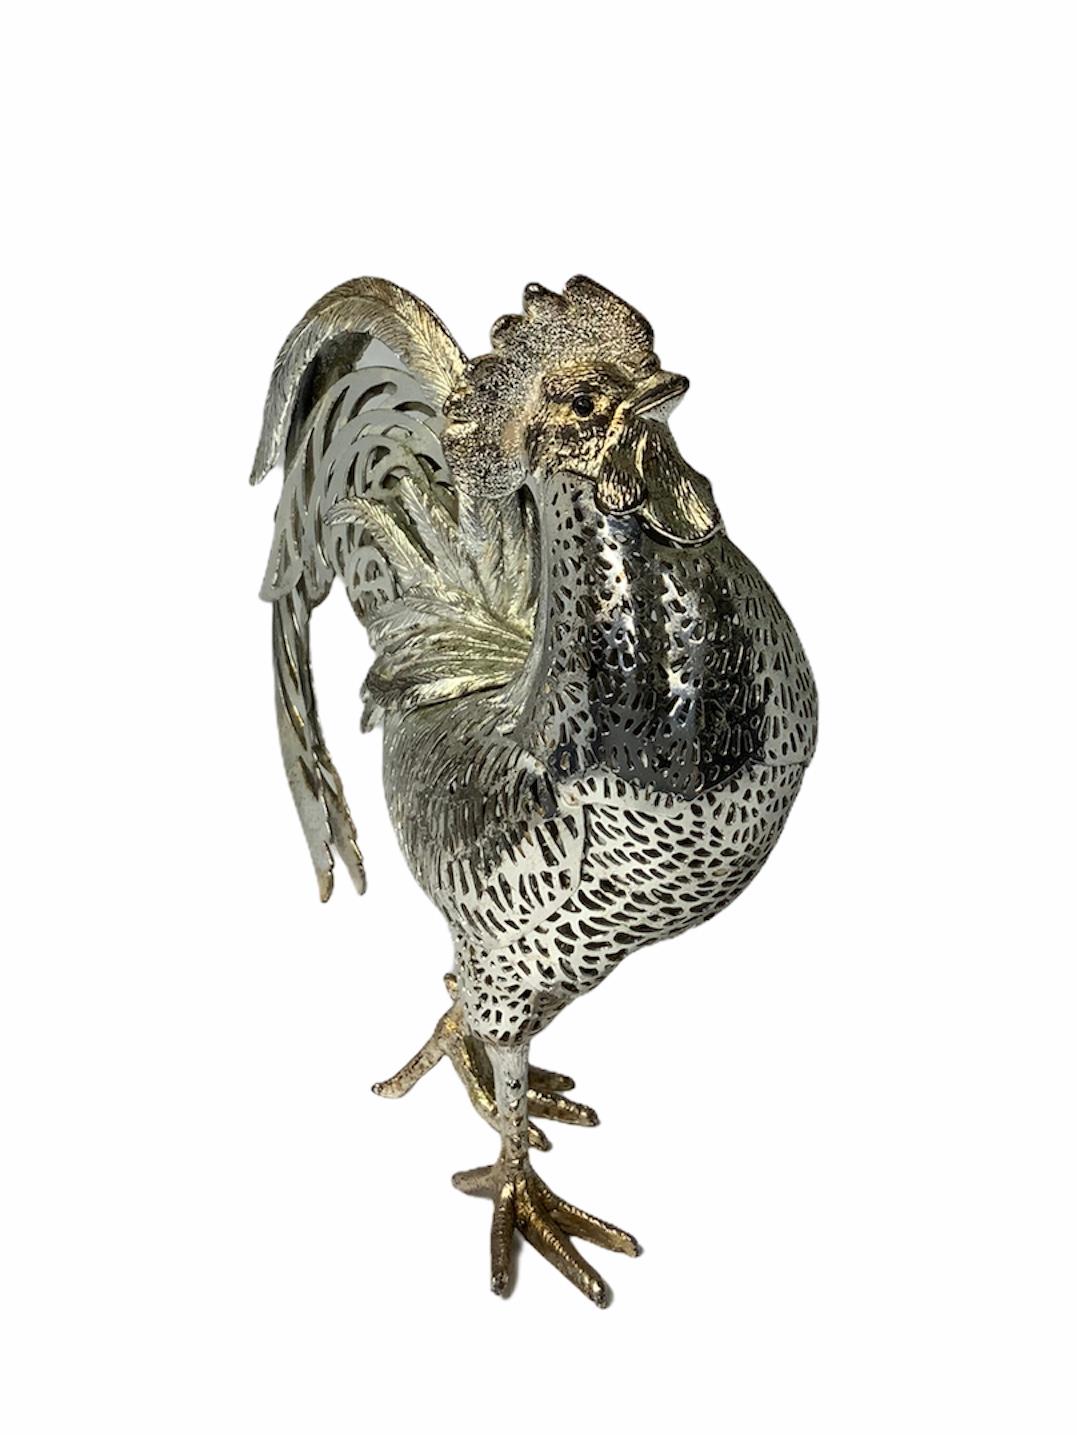 Christofle, France Silver Plated Rooster Sculpture/Figurine 2